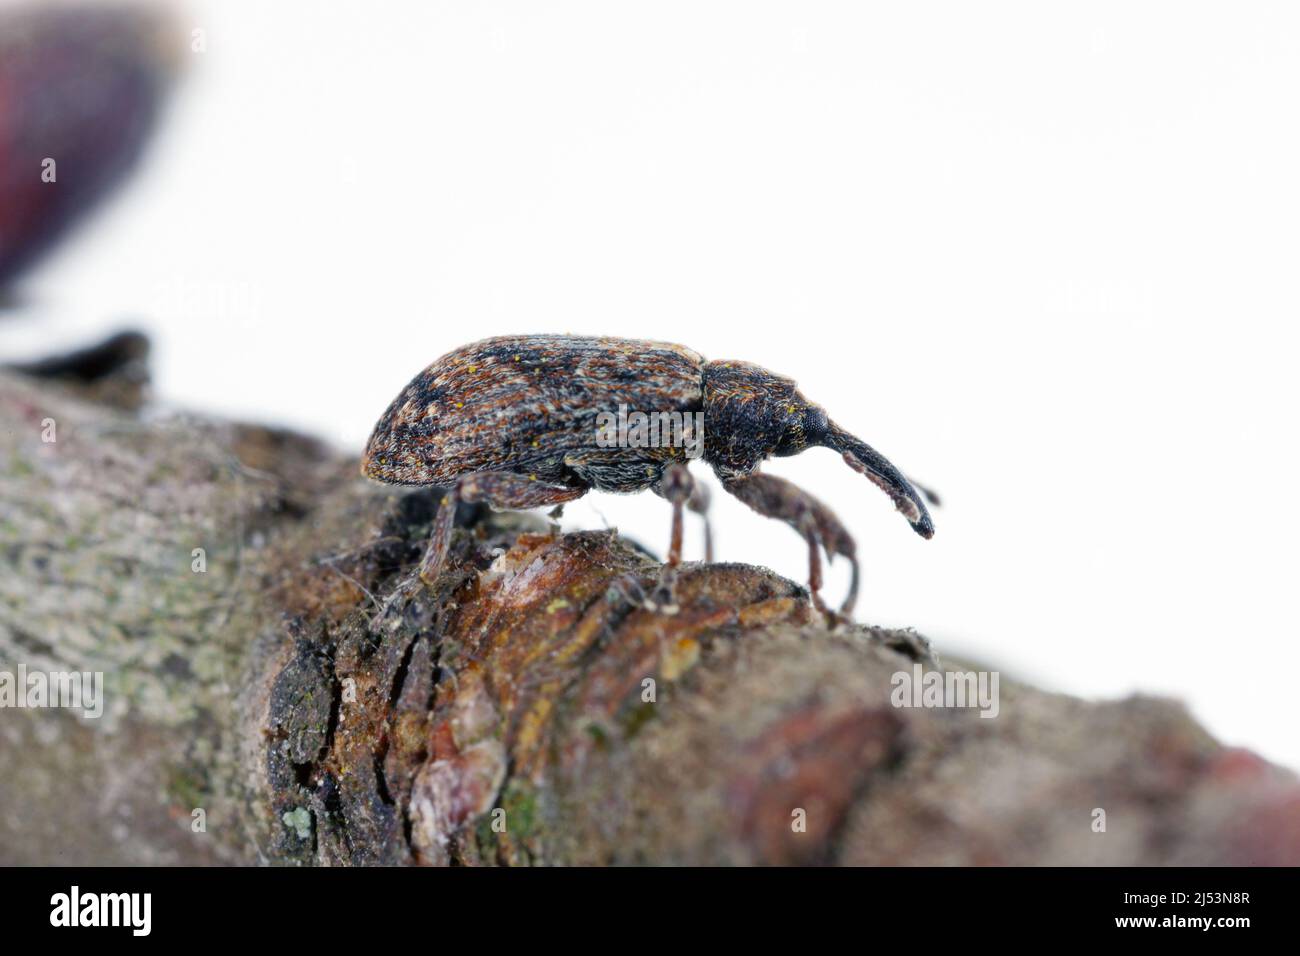 Apple blossom weevil (Anthonomus pomorum). One of the most important pests of apple trees in orchards and gardens. Stock Photo